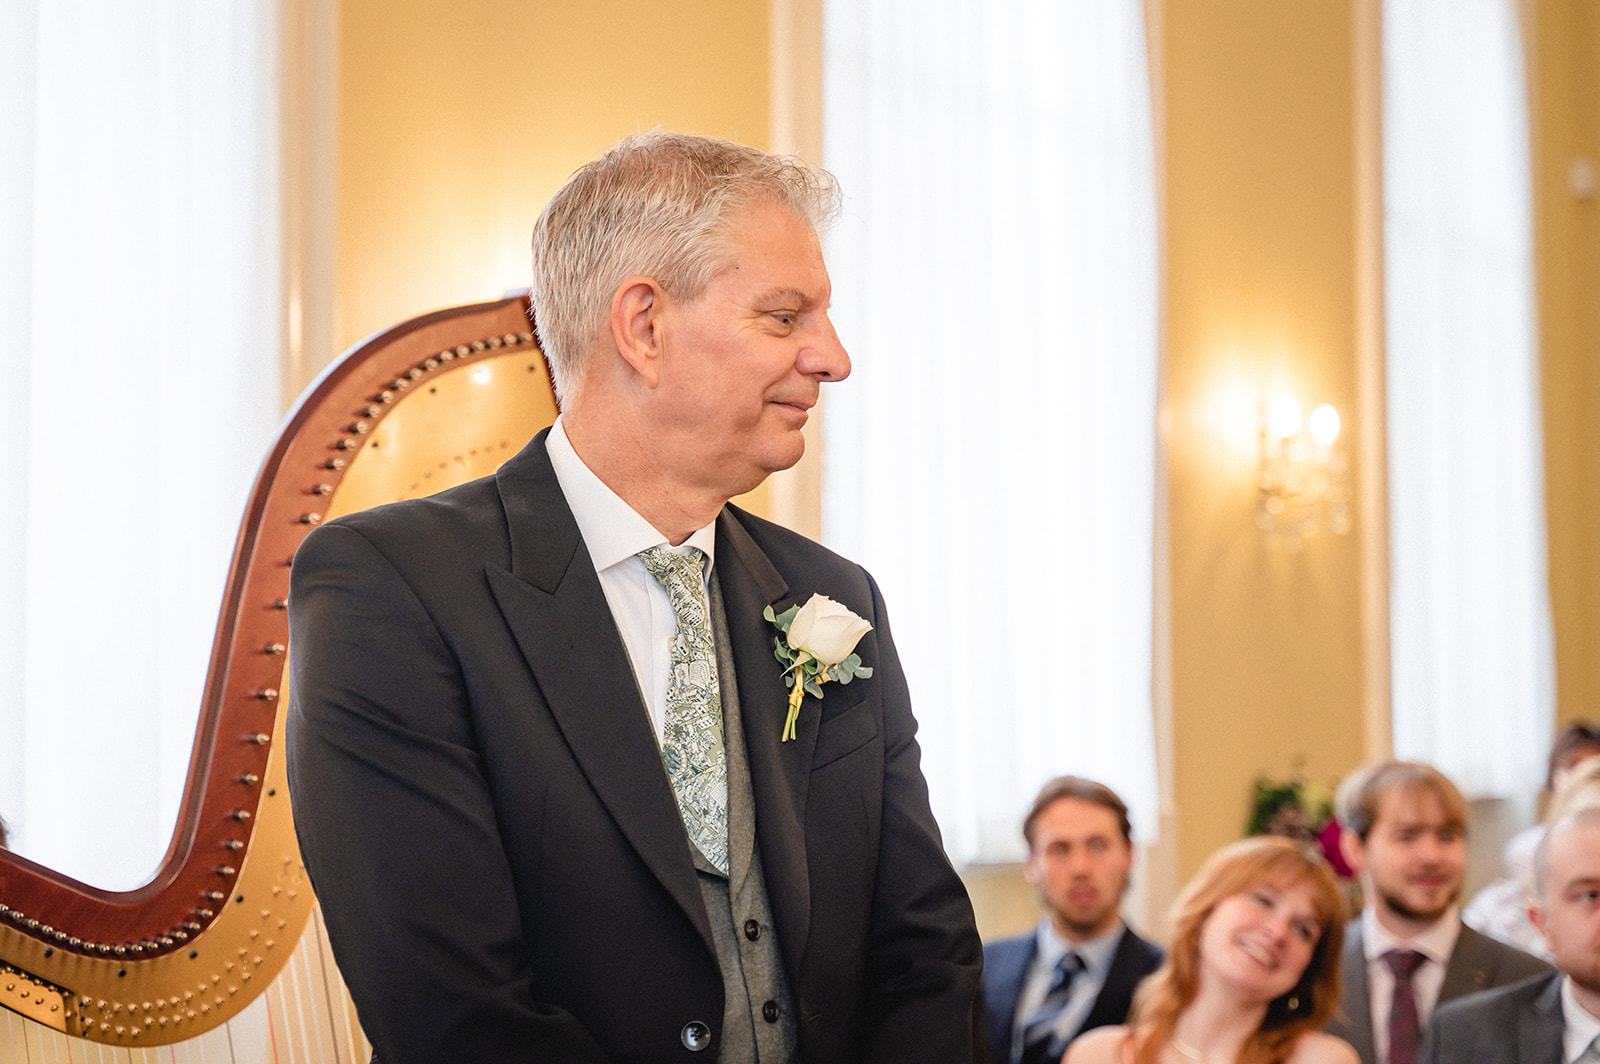 David waiting for the wedding ceremony in the Brydon Room at Chelsea Town Hall